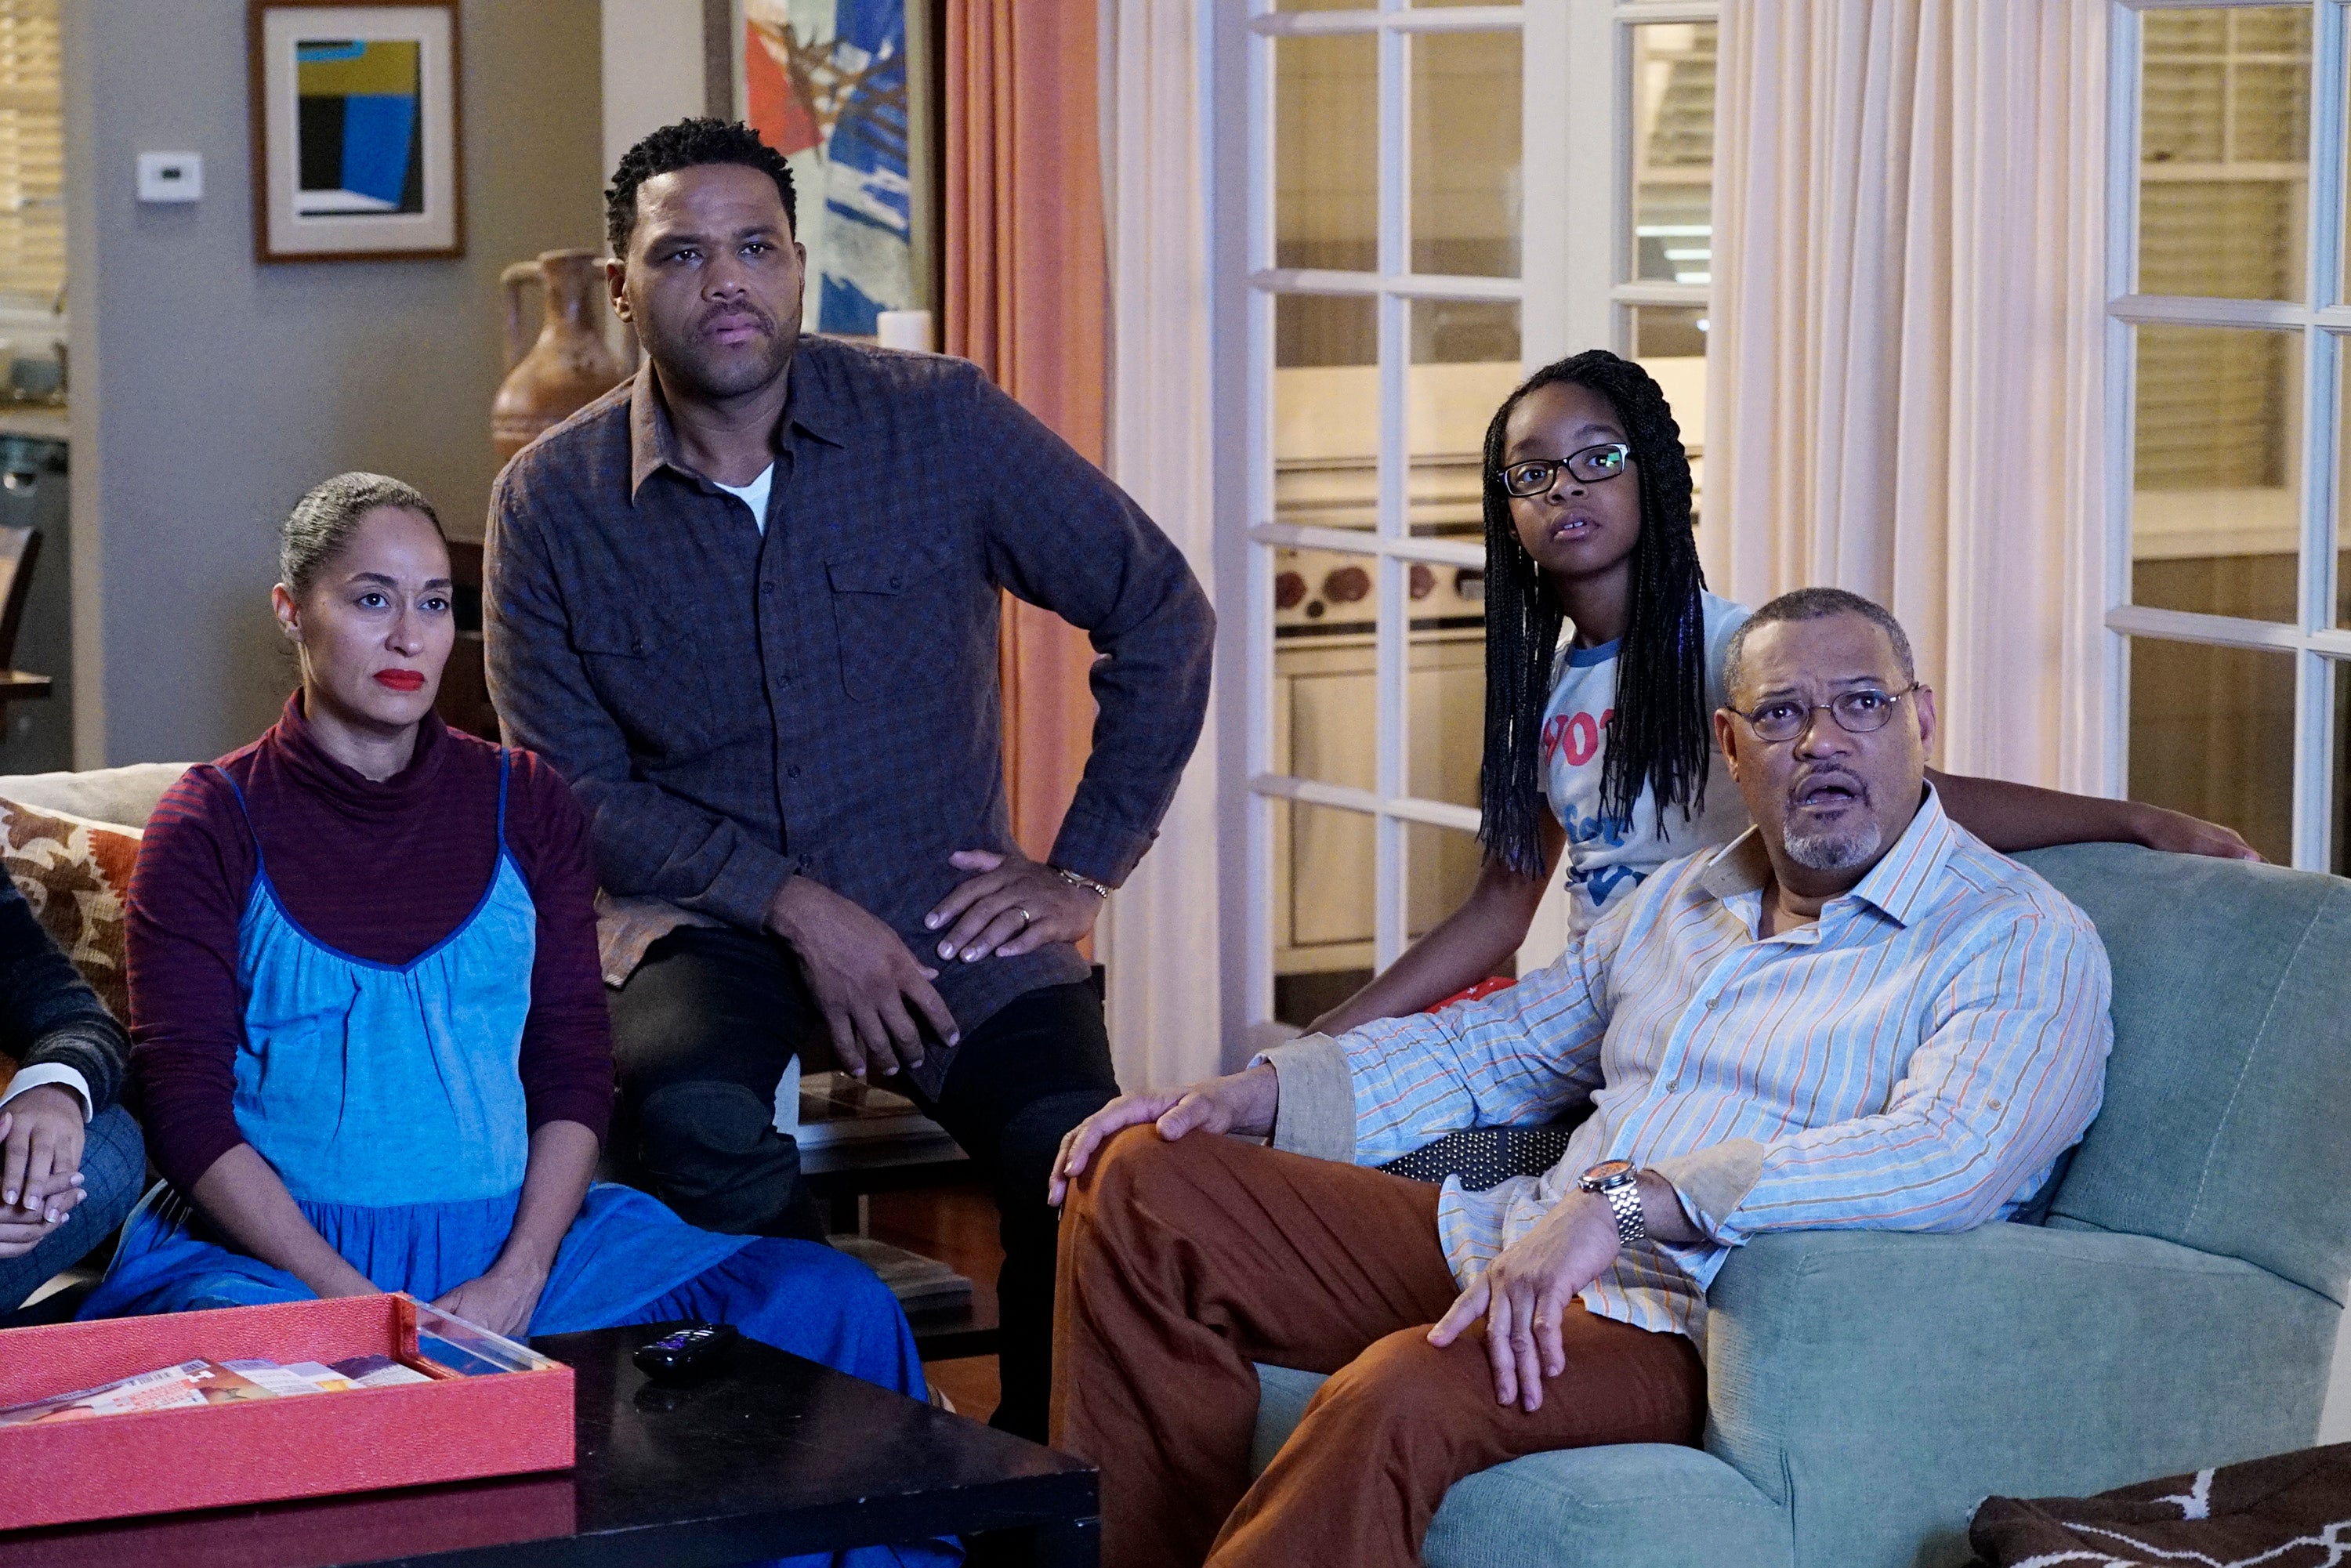 The 'Black-ish' Season Finale Is About To Take An Emotional Turn
